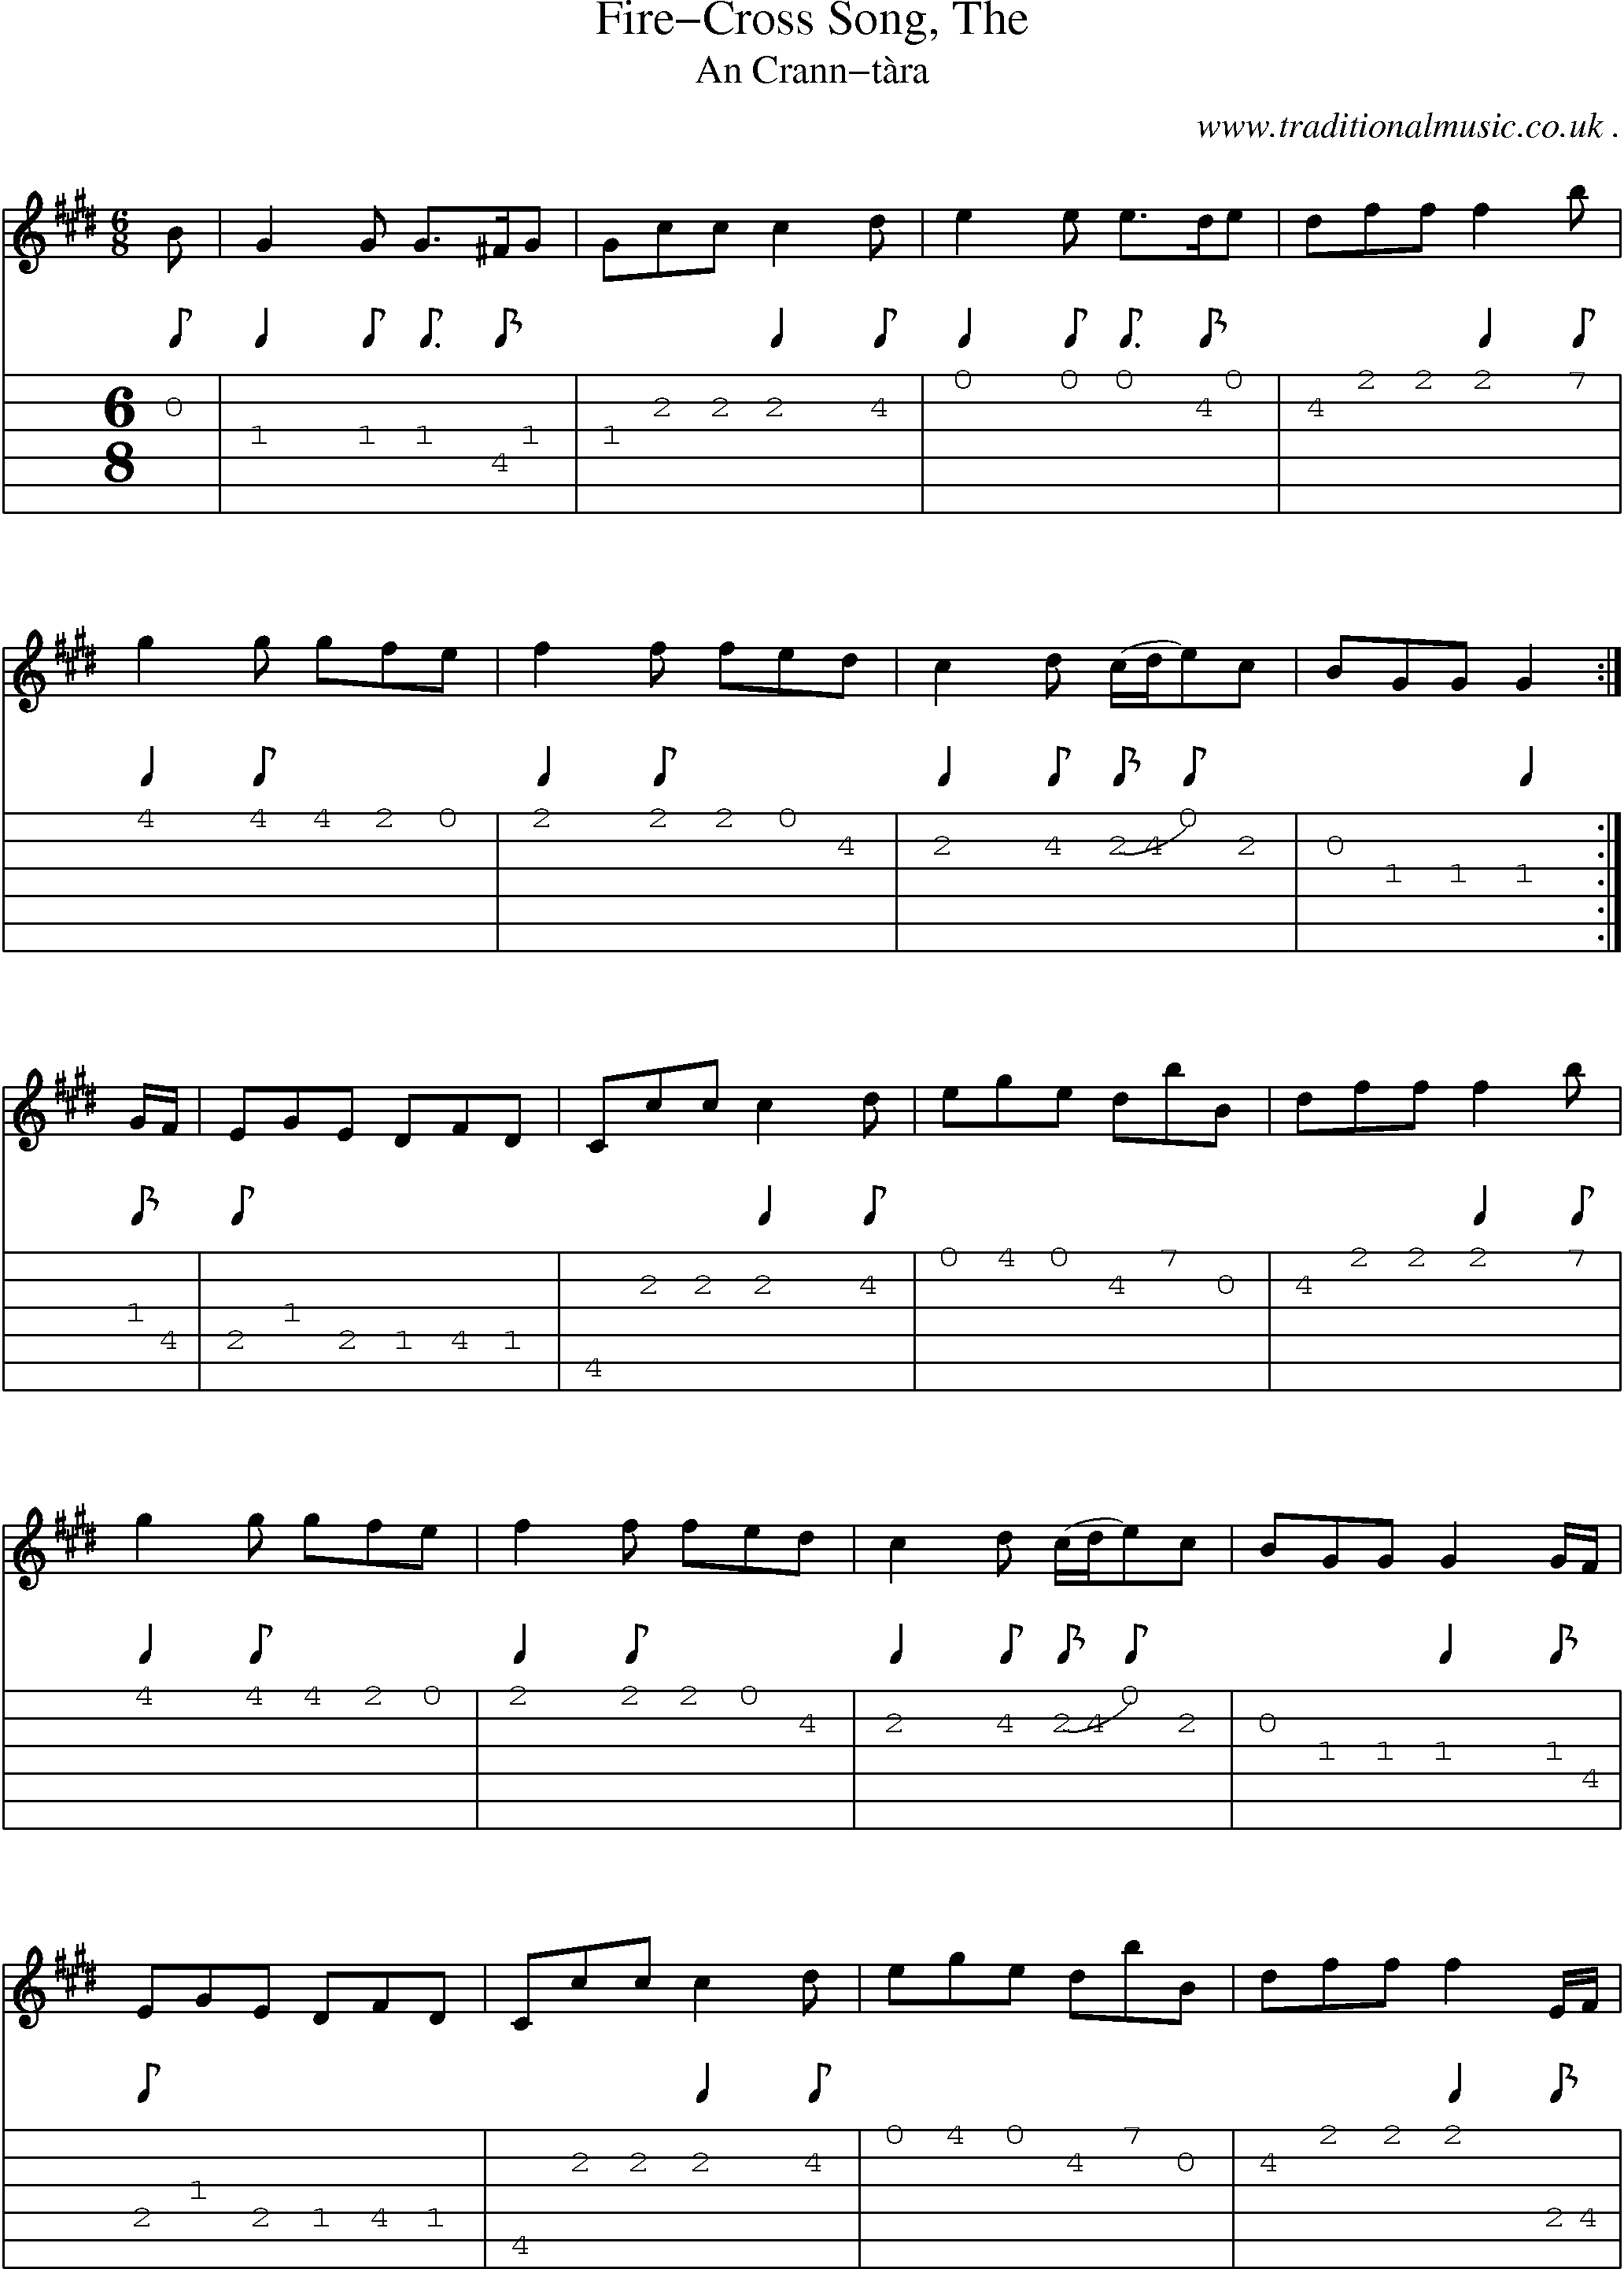 Sheet-music  score, Chords and Guitar Tabs for Fire-cross Song The 